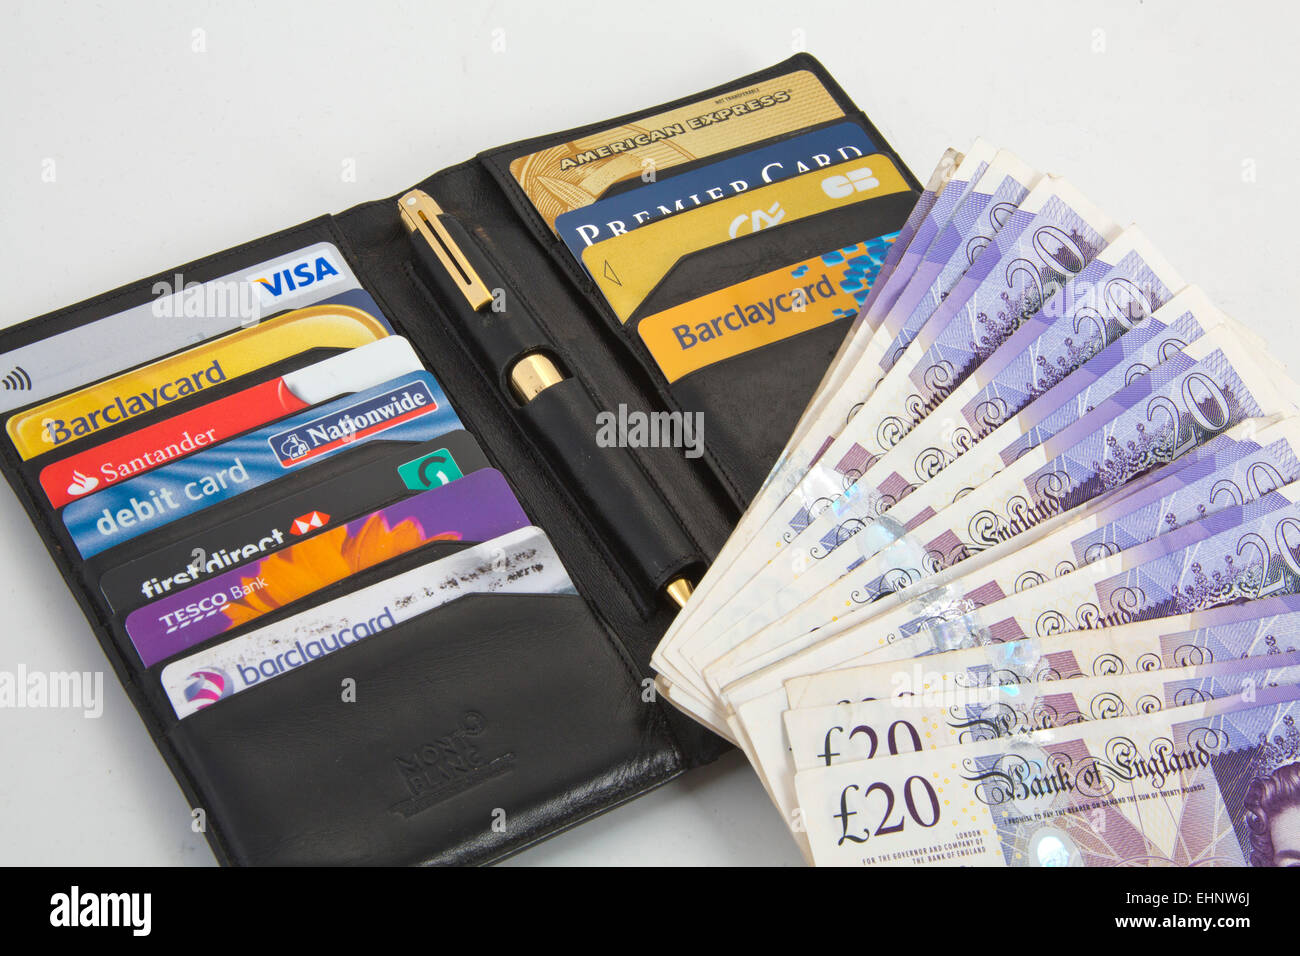 Black wallet with Assortment of credit cards Visa and American express 151146 Credit Cards Stock Photo